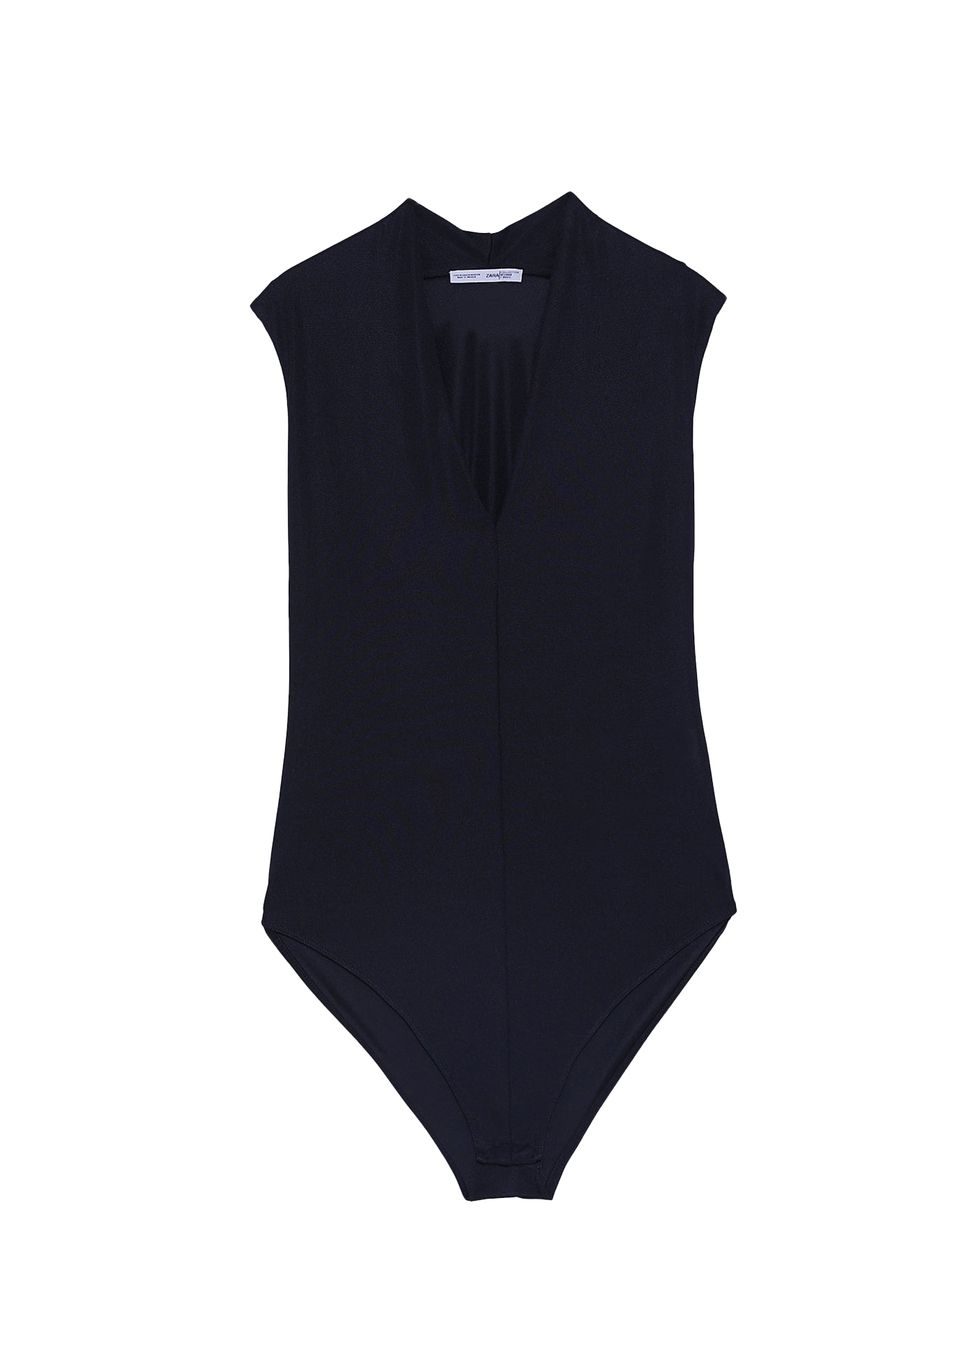 Clothing, Black, White, Product, One-piece swimsuit, Outerwear, Sleeve, Swimwear, Maillot, Neck, 